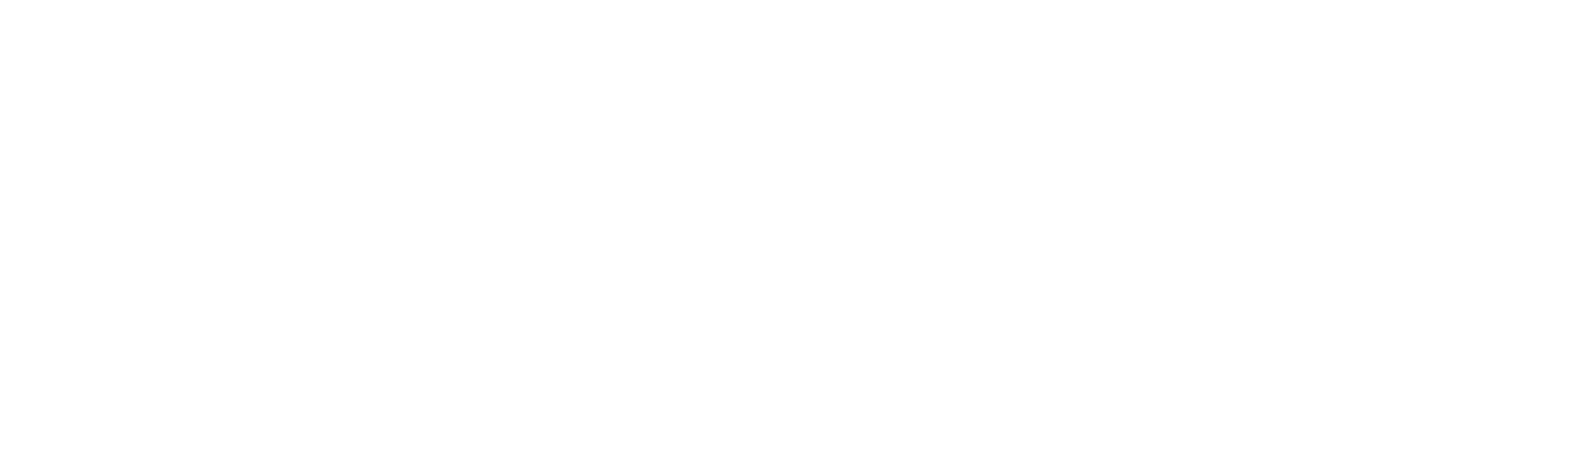 Cheniere Energy
 logo large for dark backgrounds (transparent PNG)